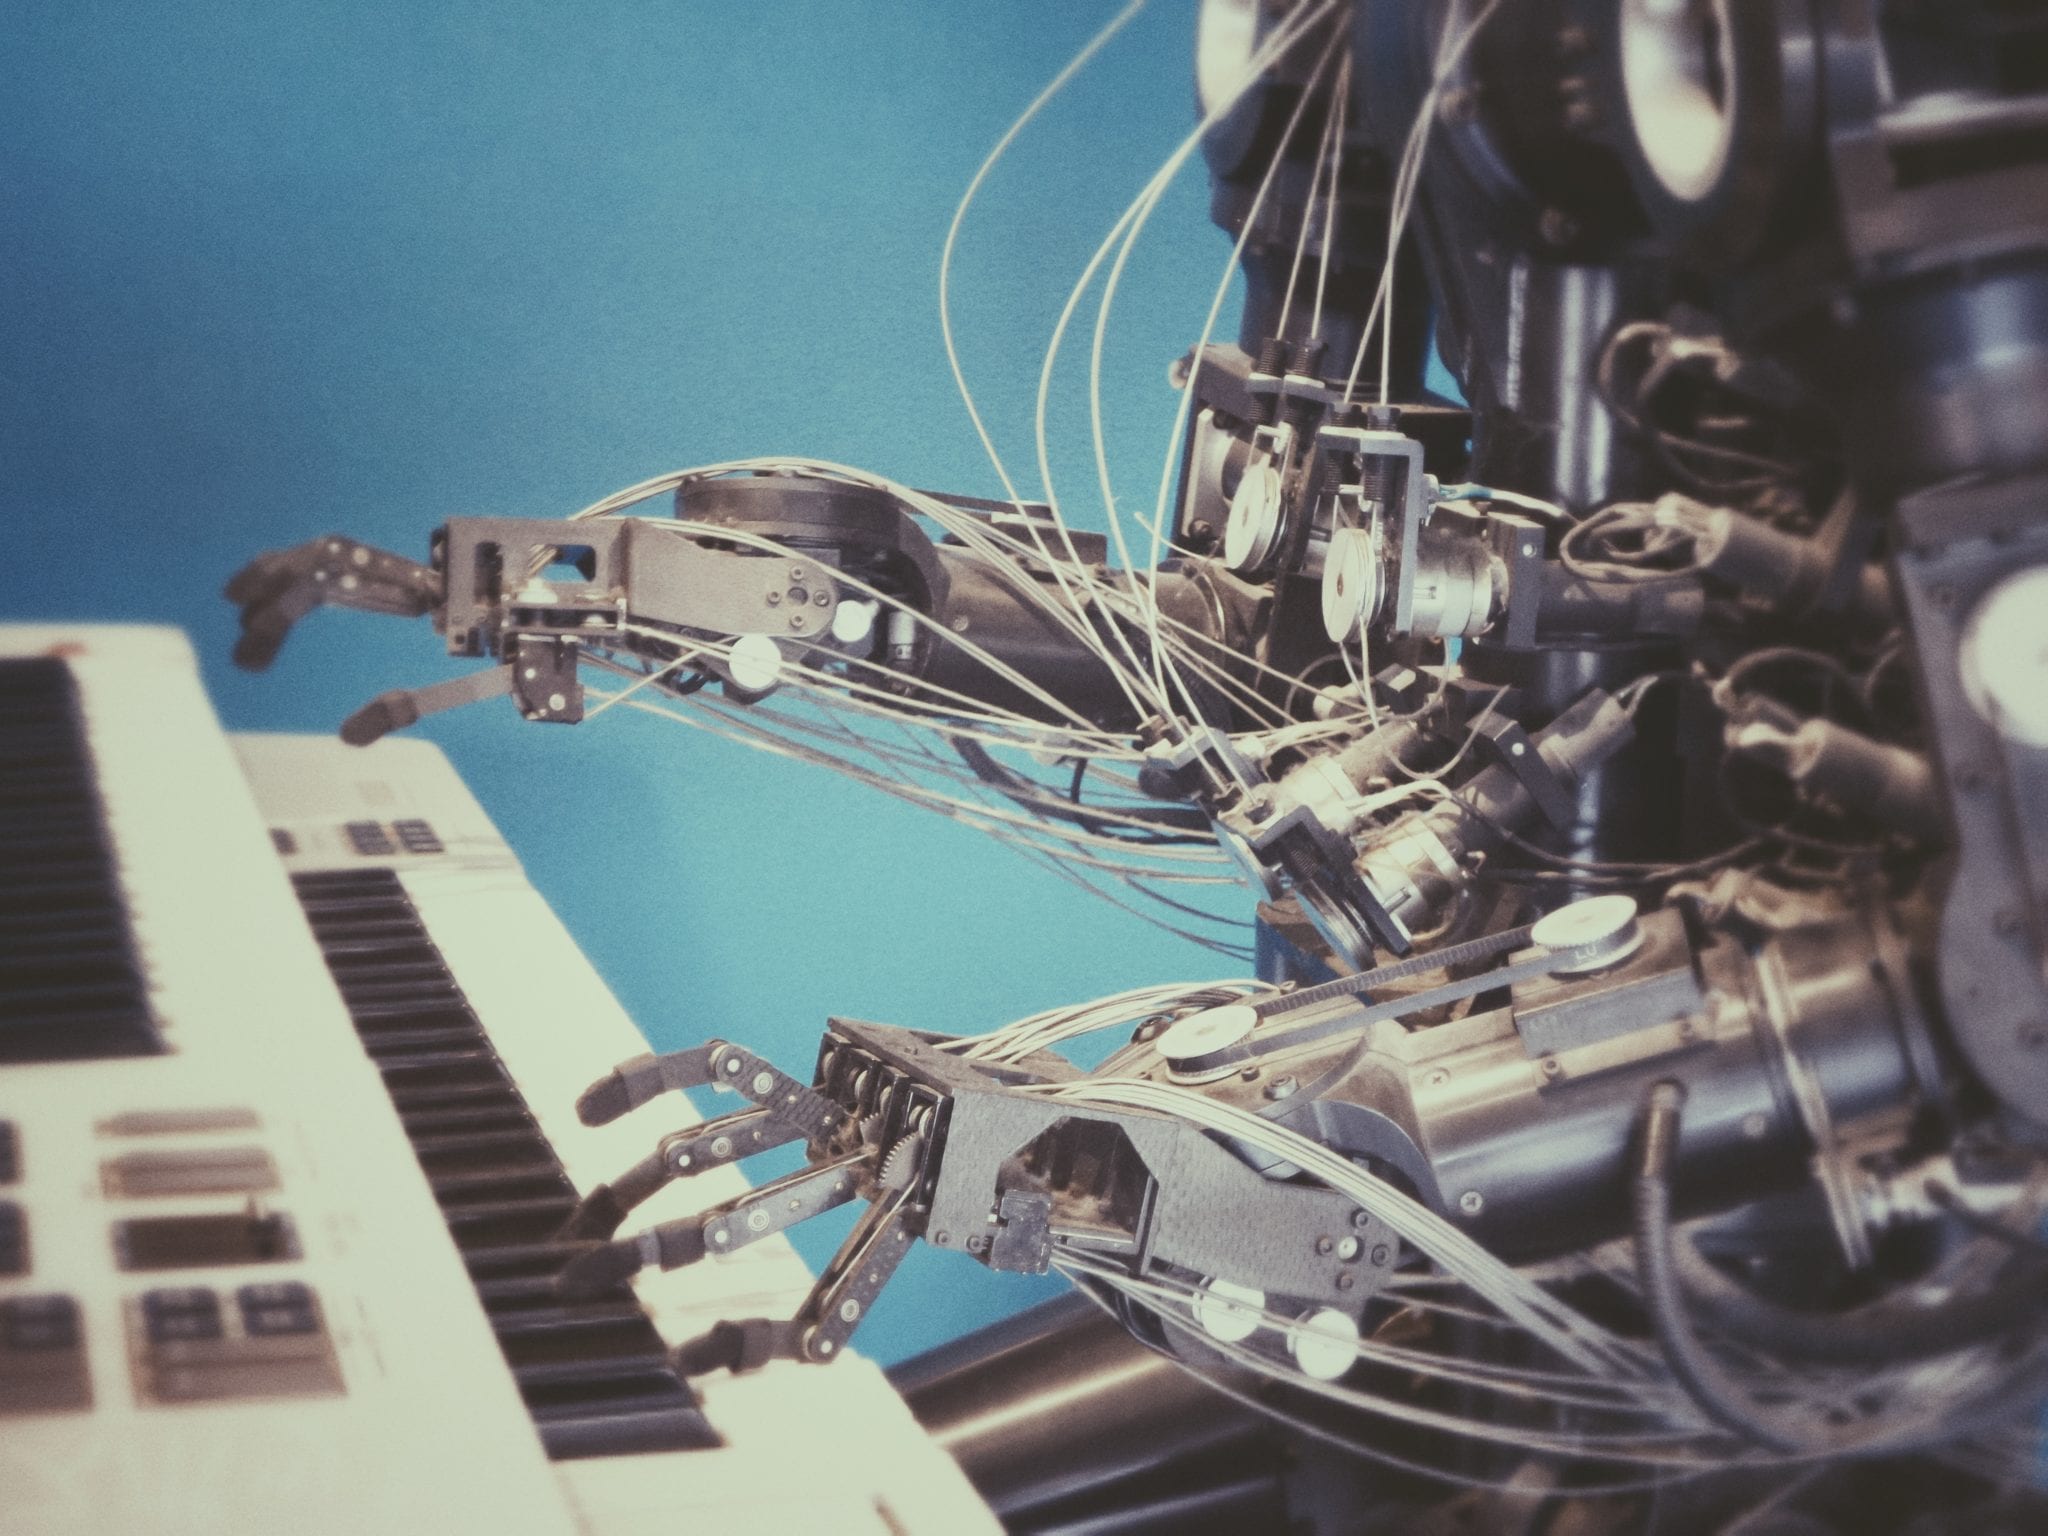 Automation Engagement Flow represented by robot playing keyboard